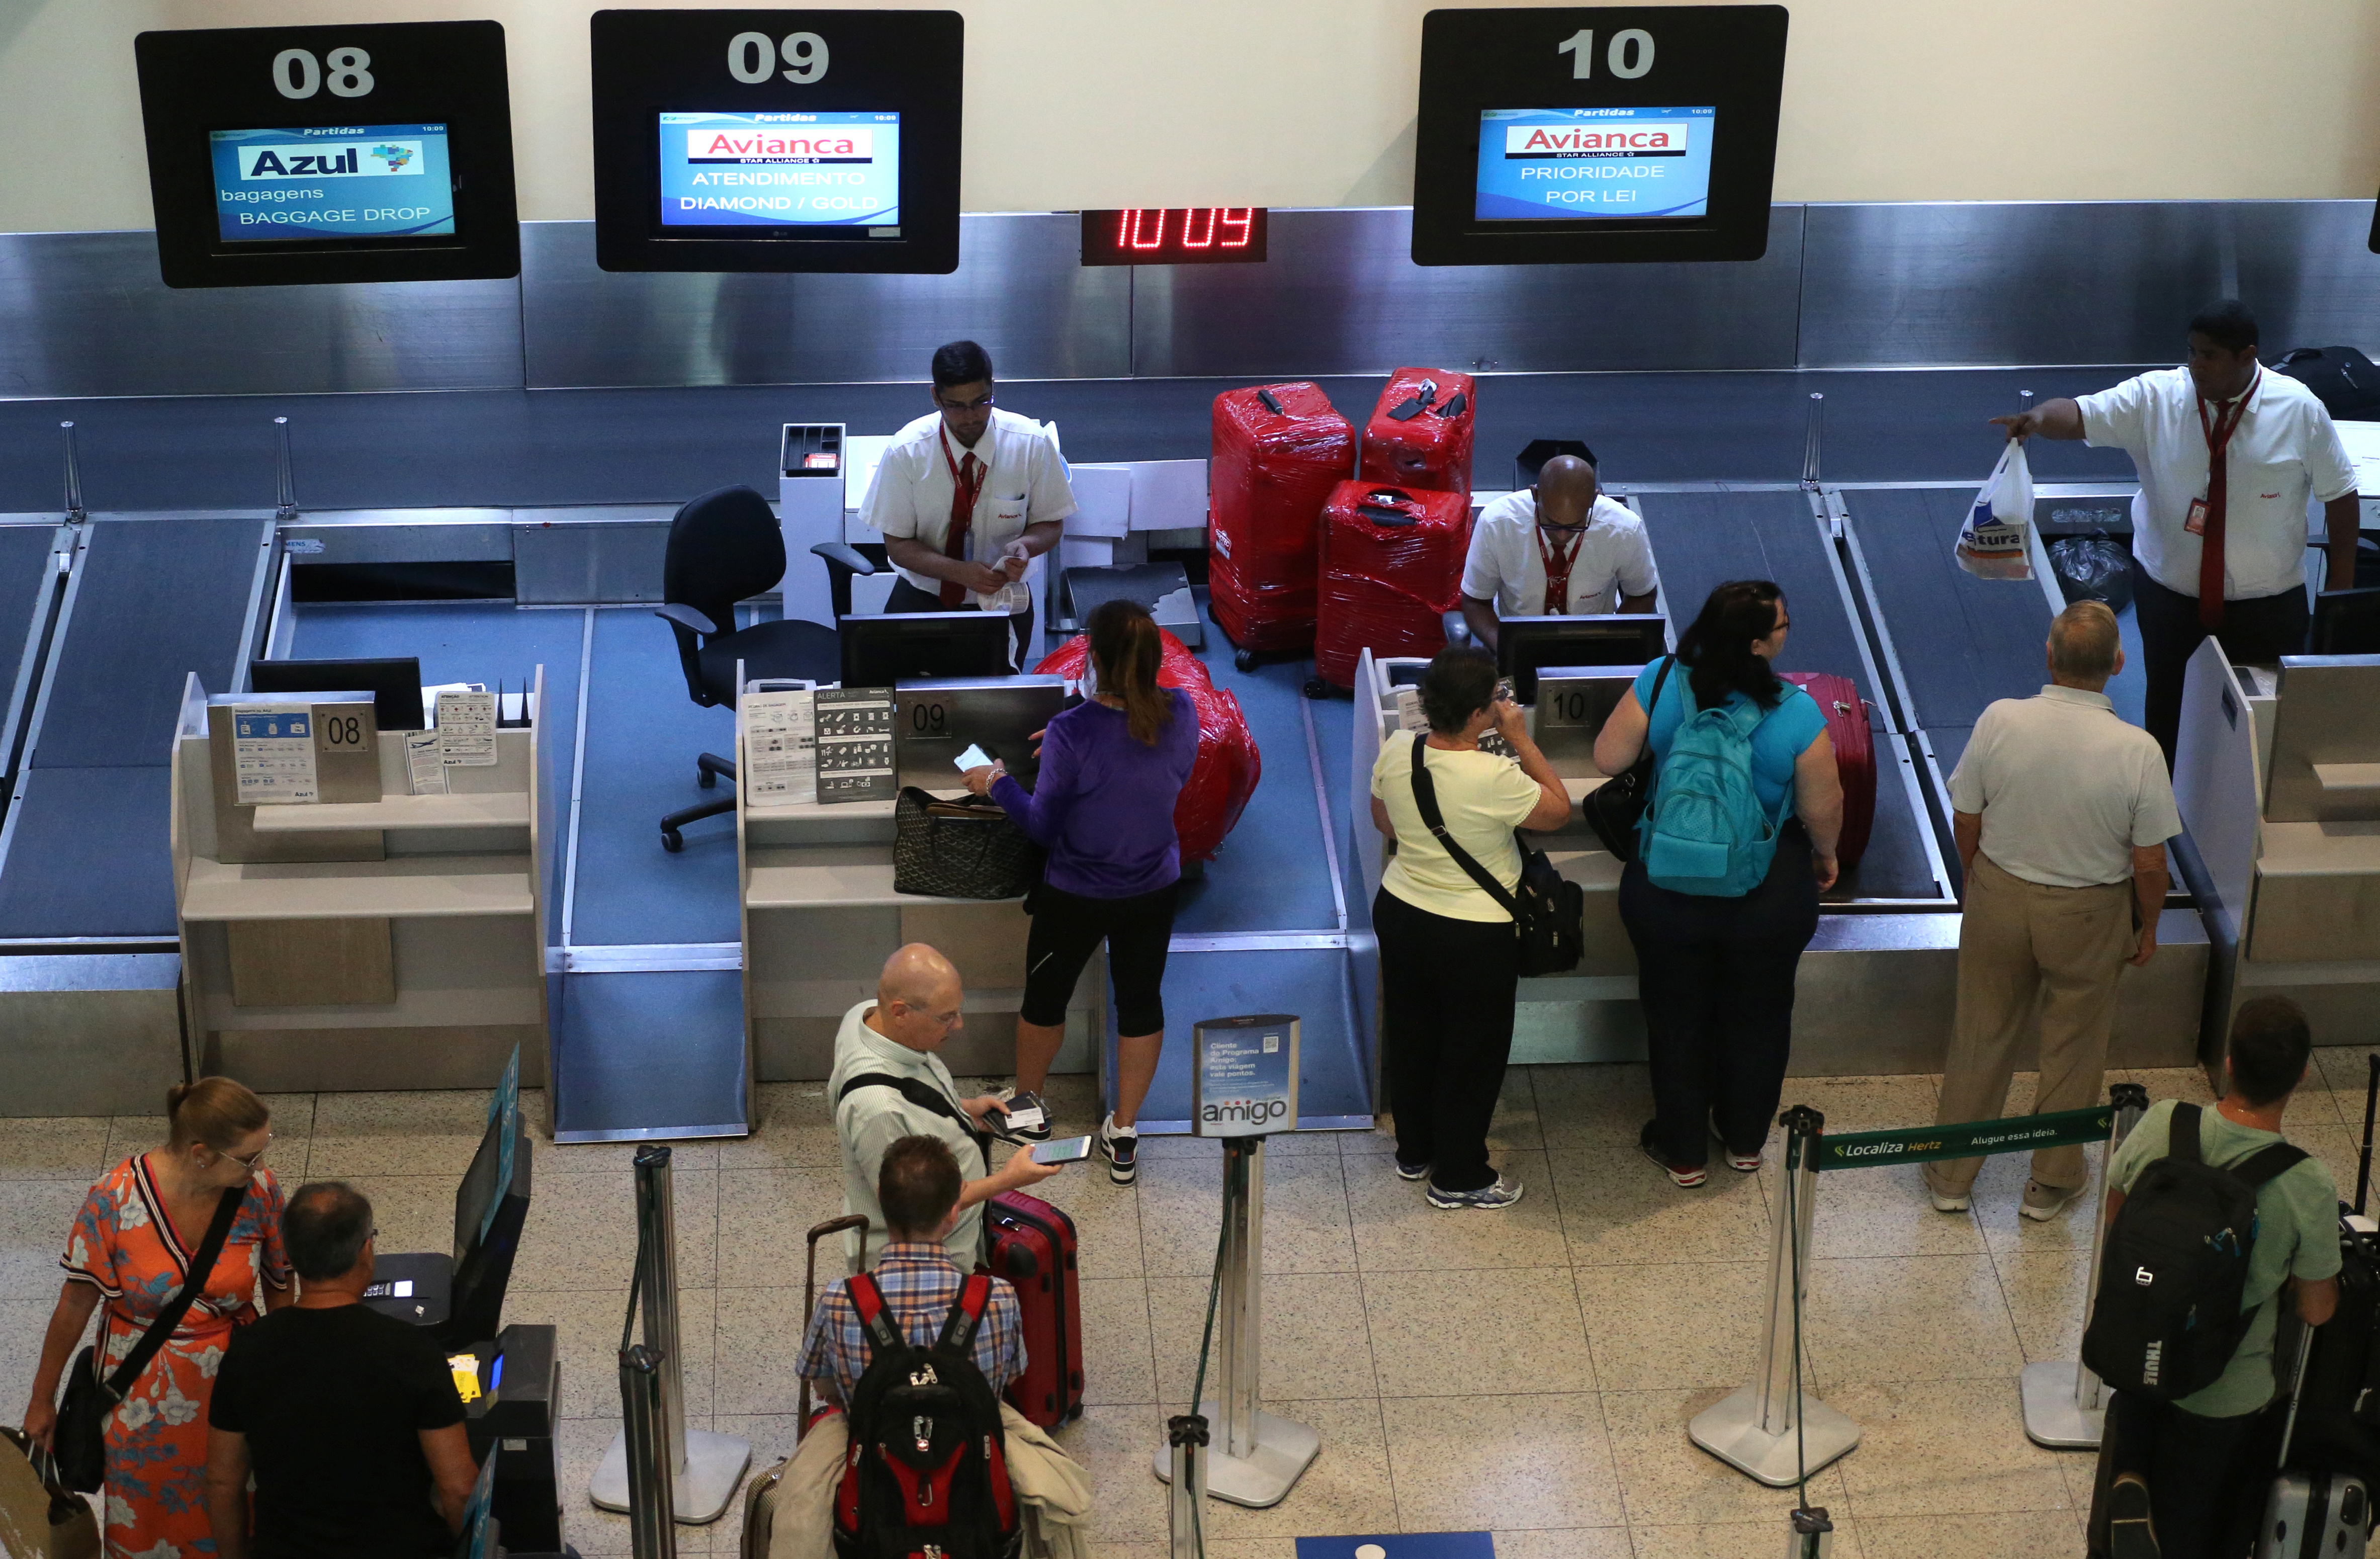 Passengers are seen as they check in at the counters of airlines Avianca and Azul at Santos Dumont airport in Rio de Janeiro